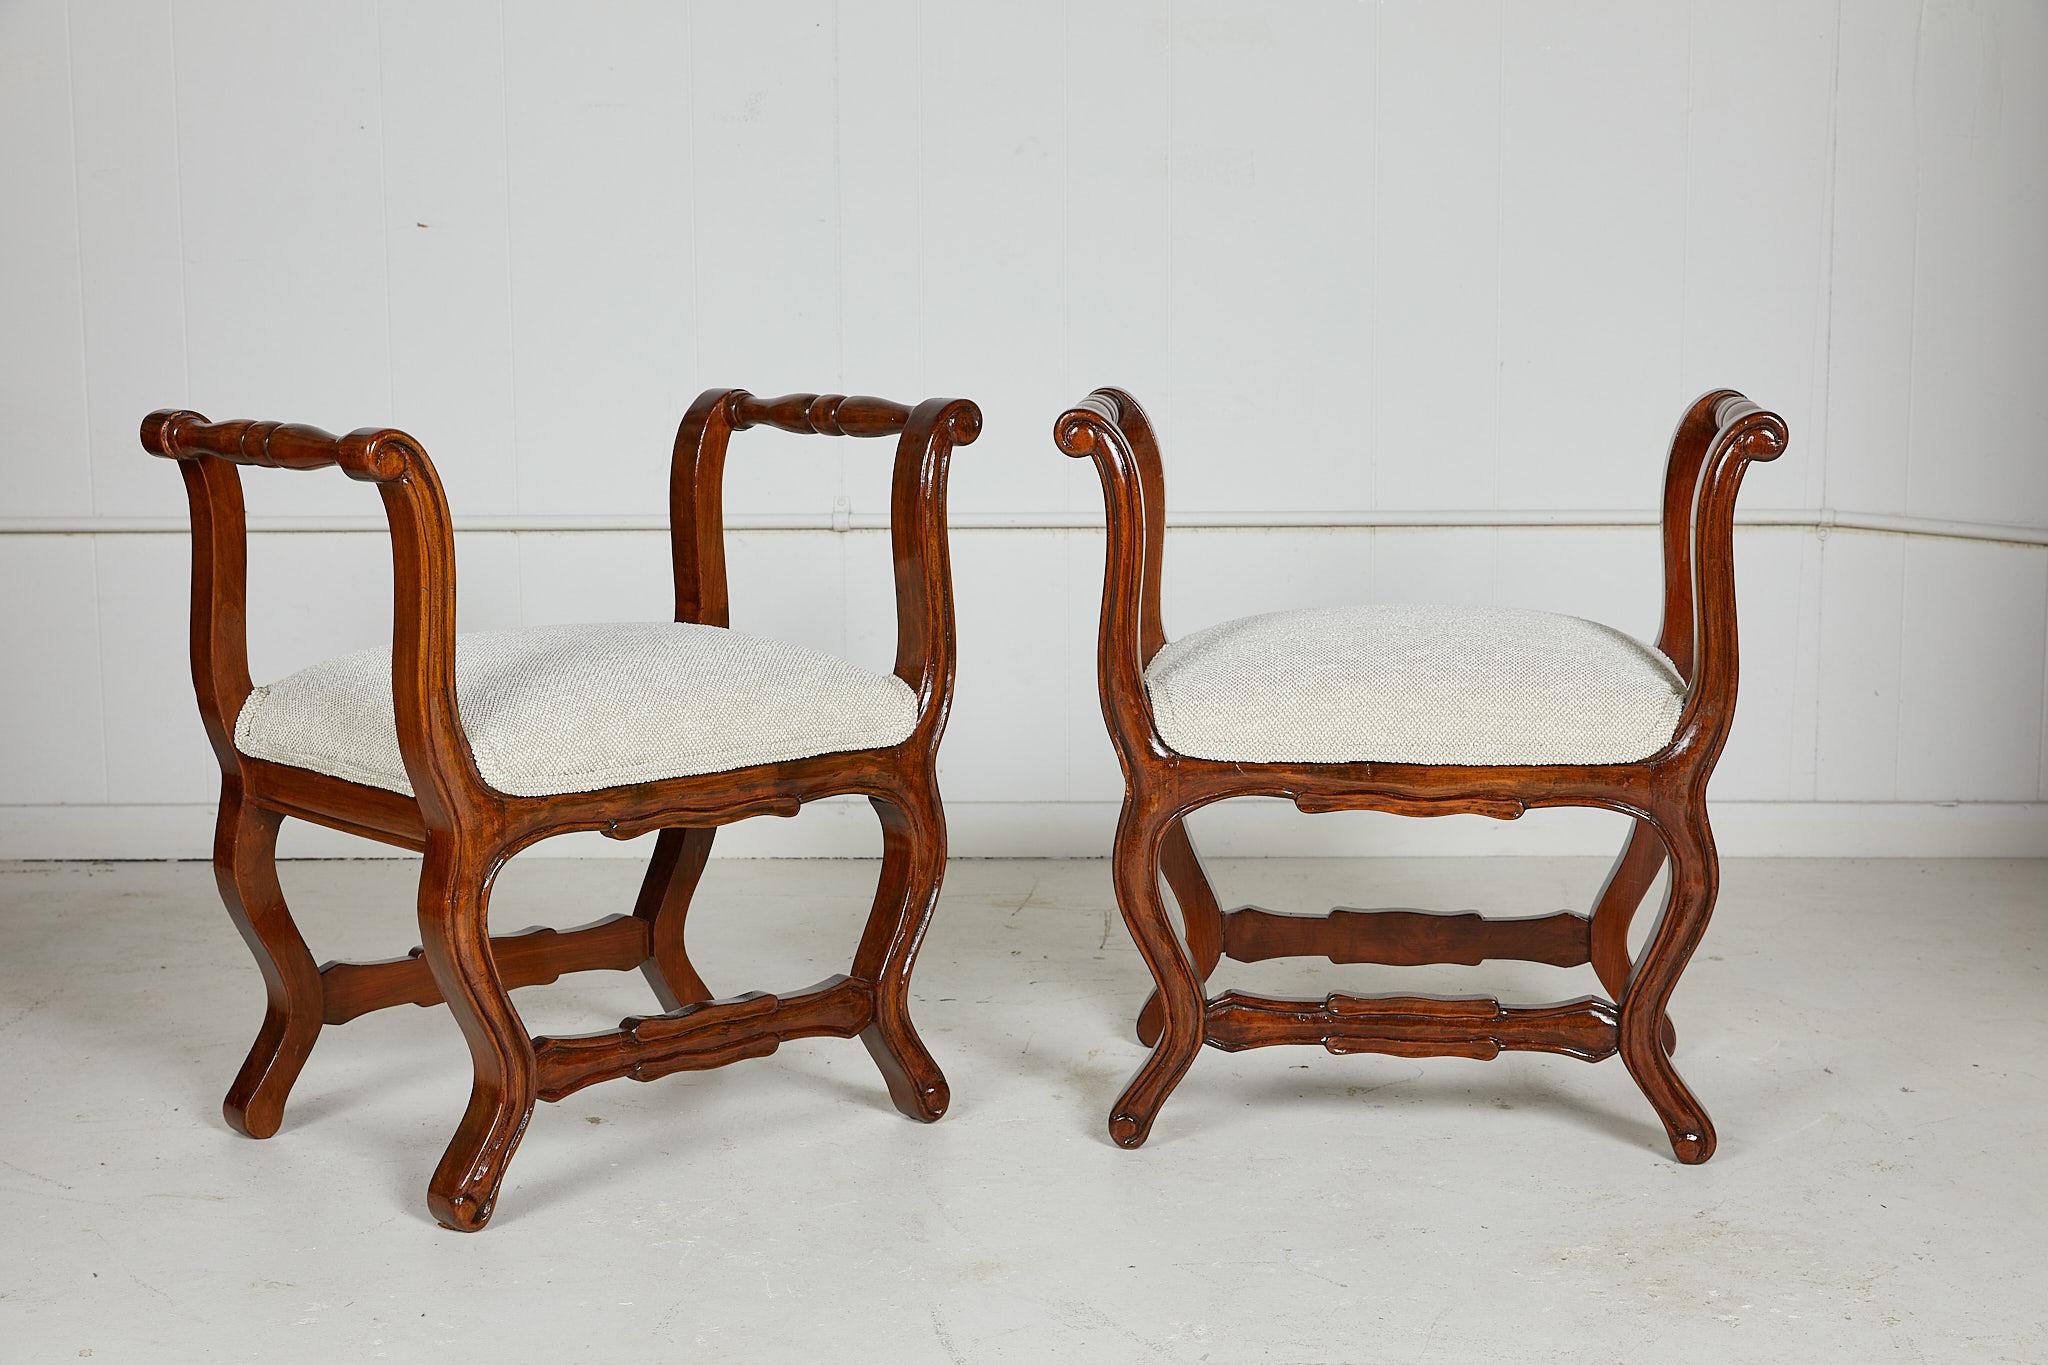 Early 20th century Italian pair of carved walnut stools in the Provencal style with upswept and turned arm rests and an upholstered seat. The seat is newly upholstered in a cream and tan tweed by Jim Thompson fabrics.